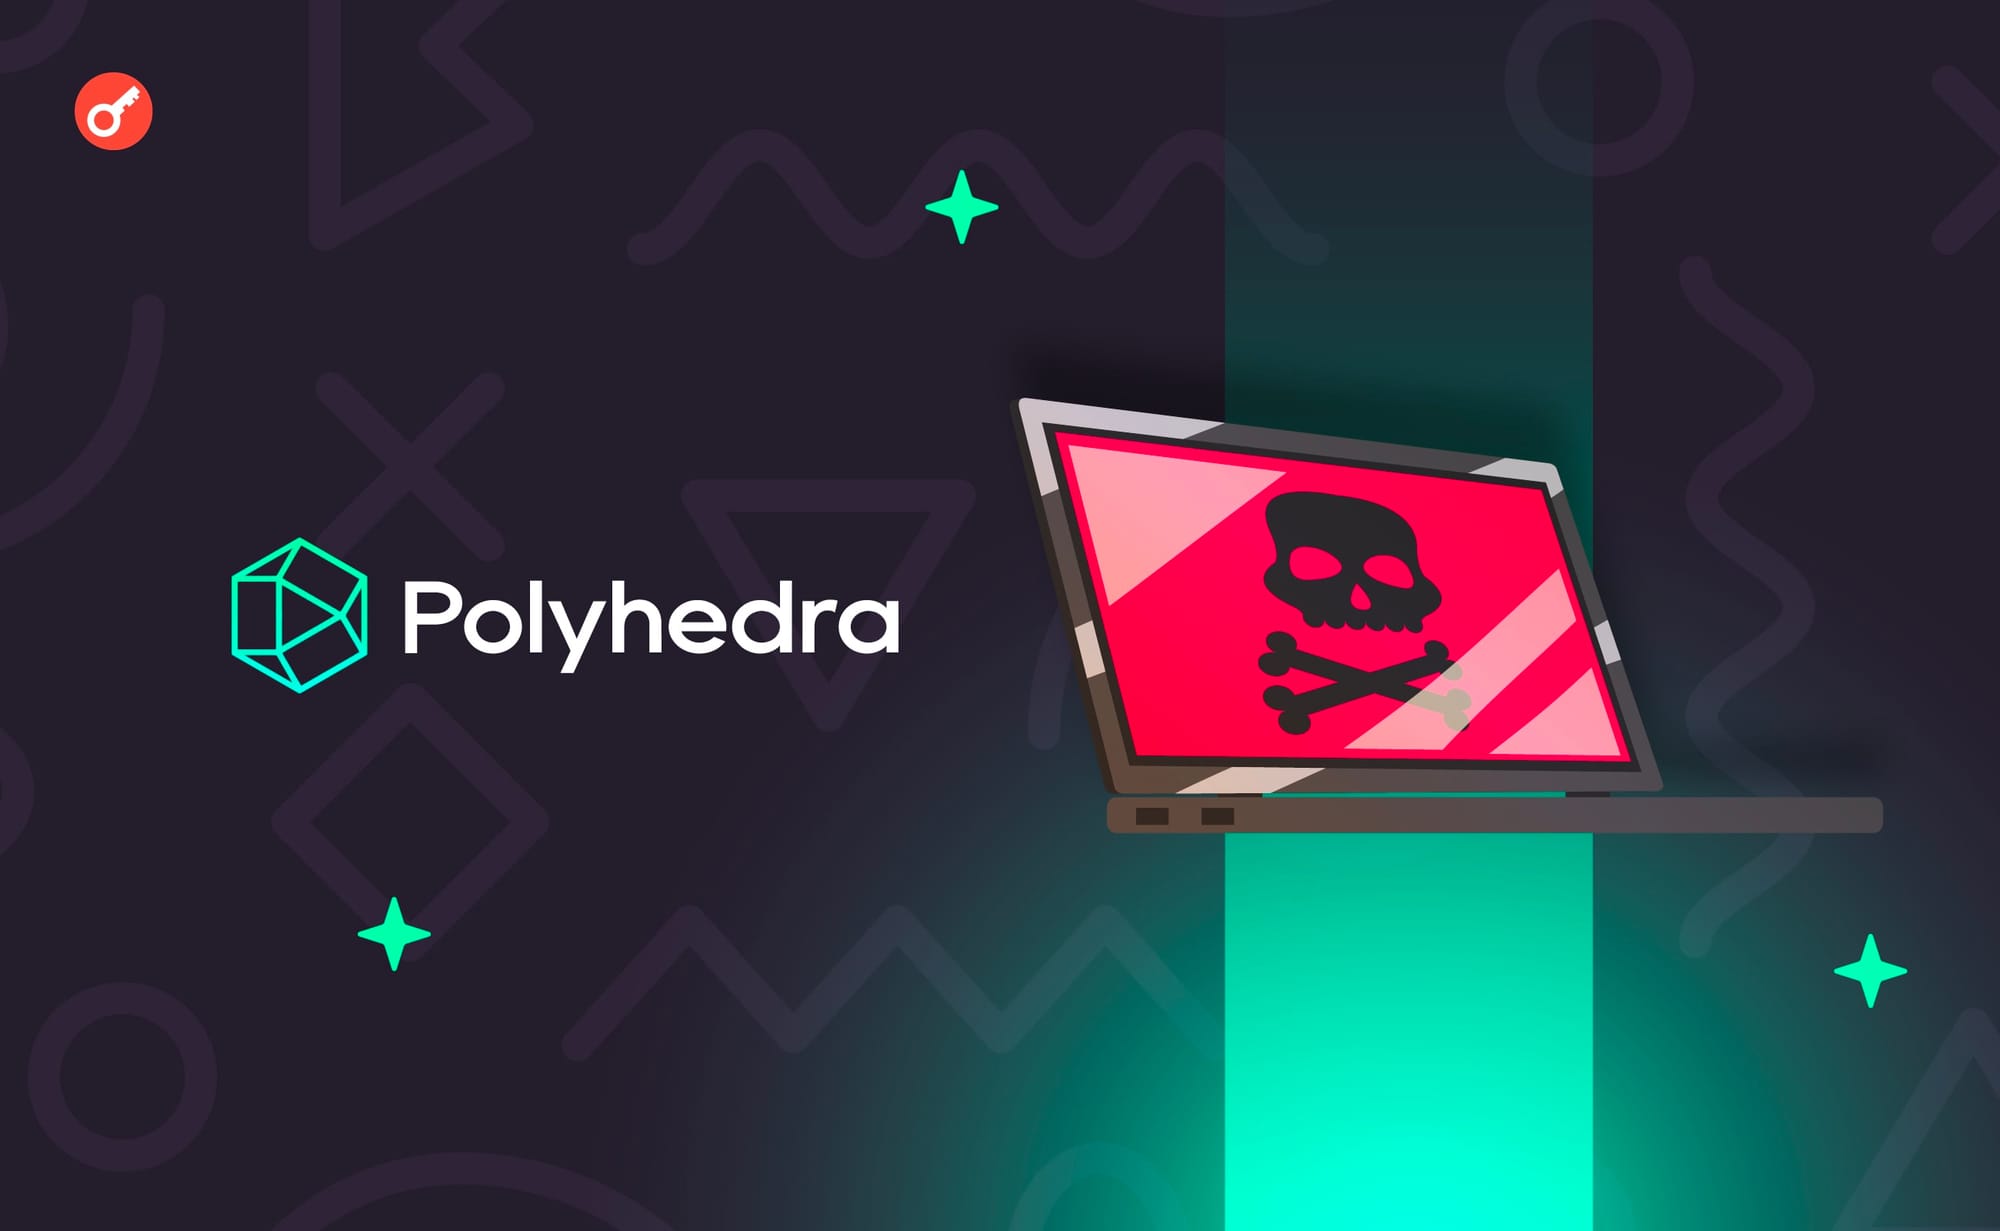 The Polyhedra Network reported the theft of funds